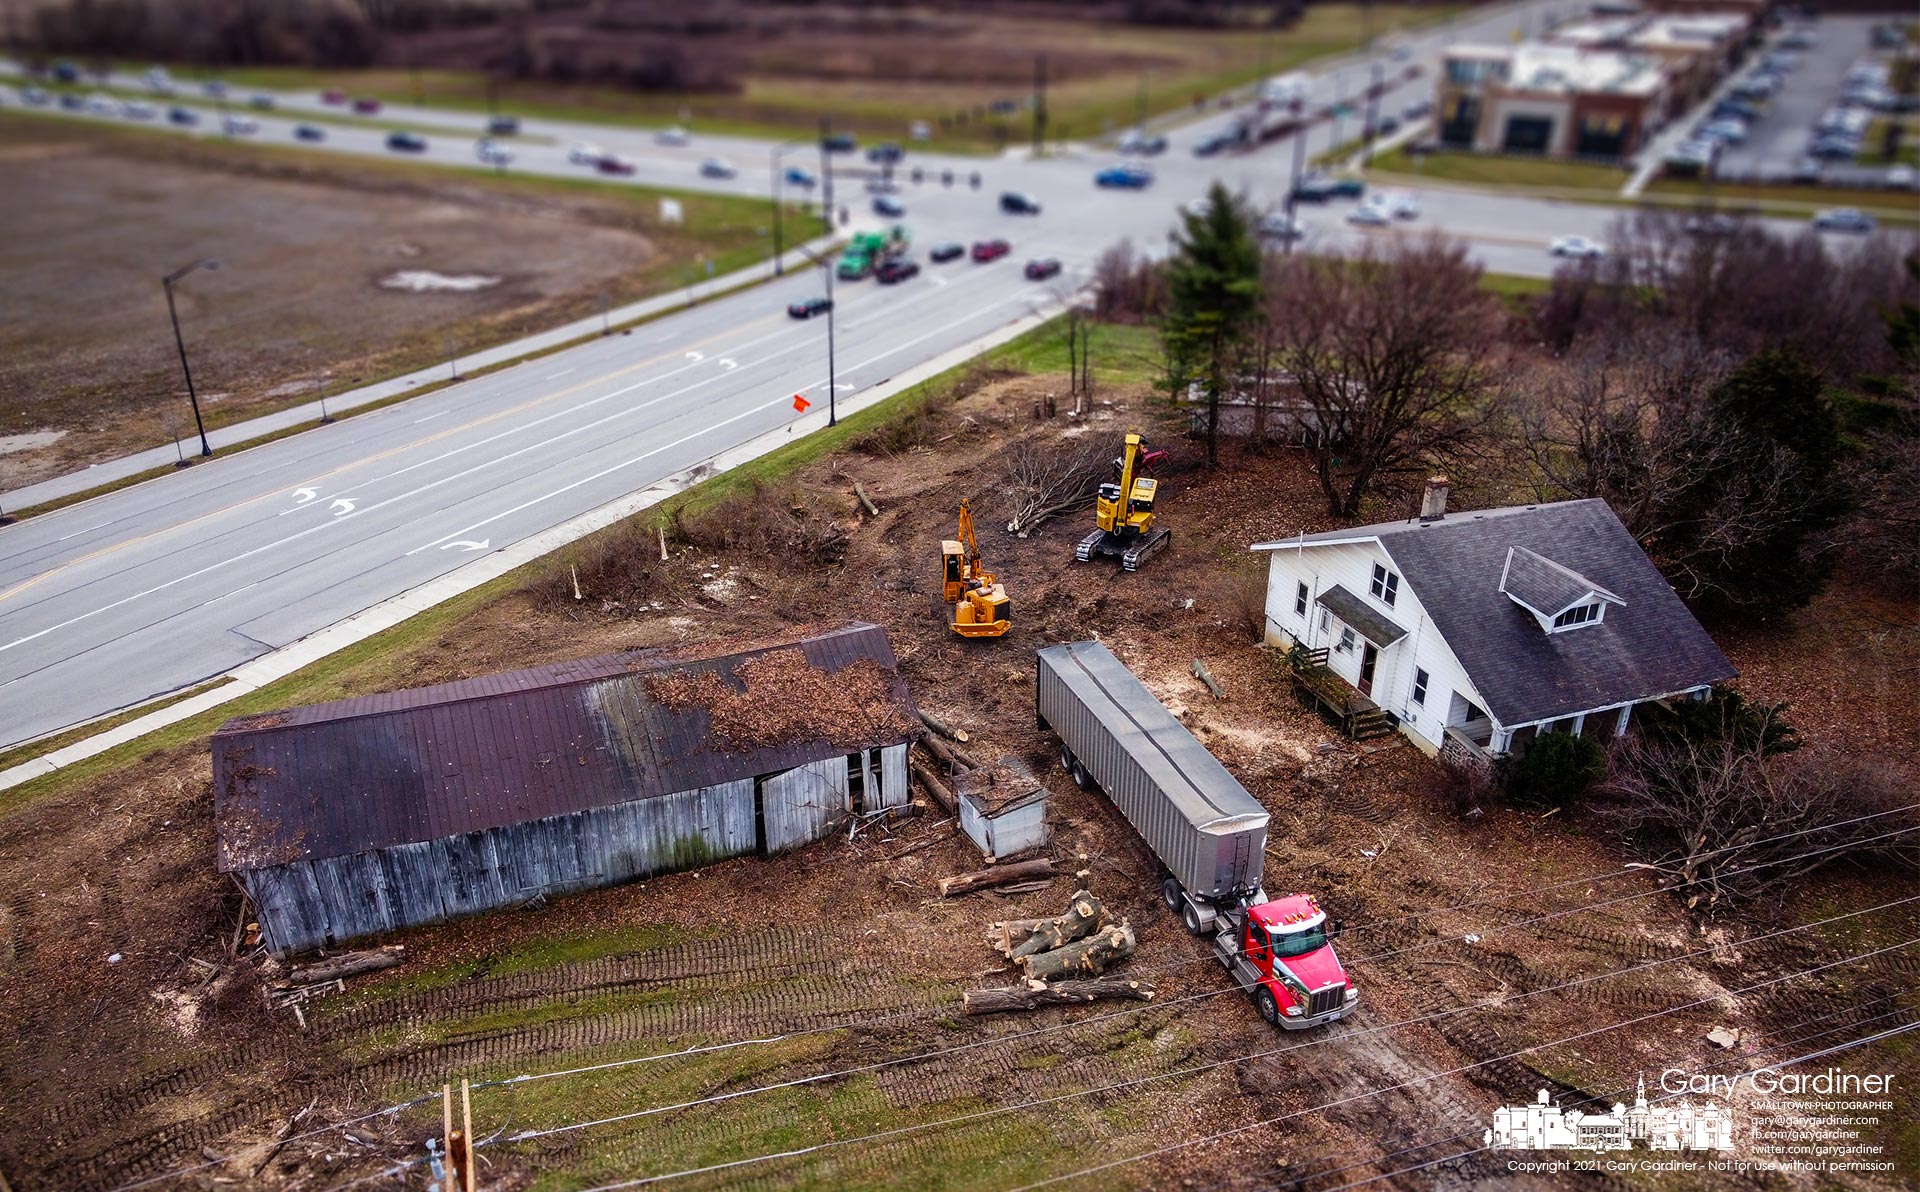 A work crew clears trees from around an old farmhouse and barns at Polaris Parkway and Worthington Galena Road where a Sheetz convenience store will begin construction in 2022. My Final Photo for Dec. 15, 2021.